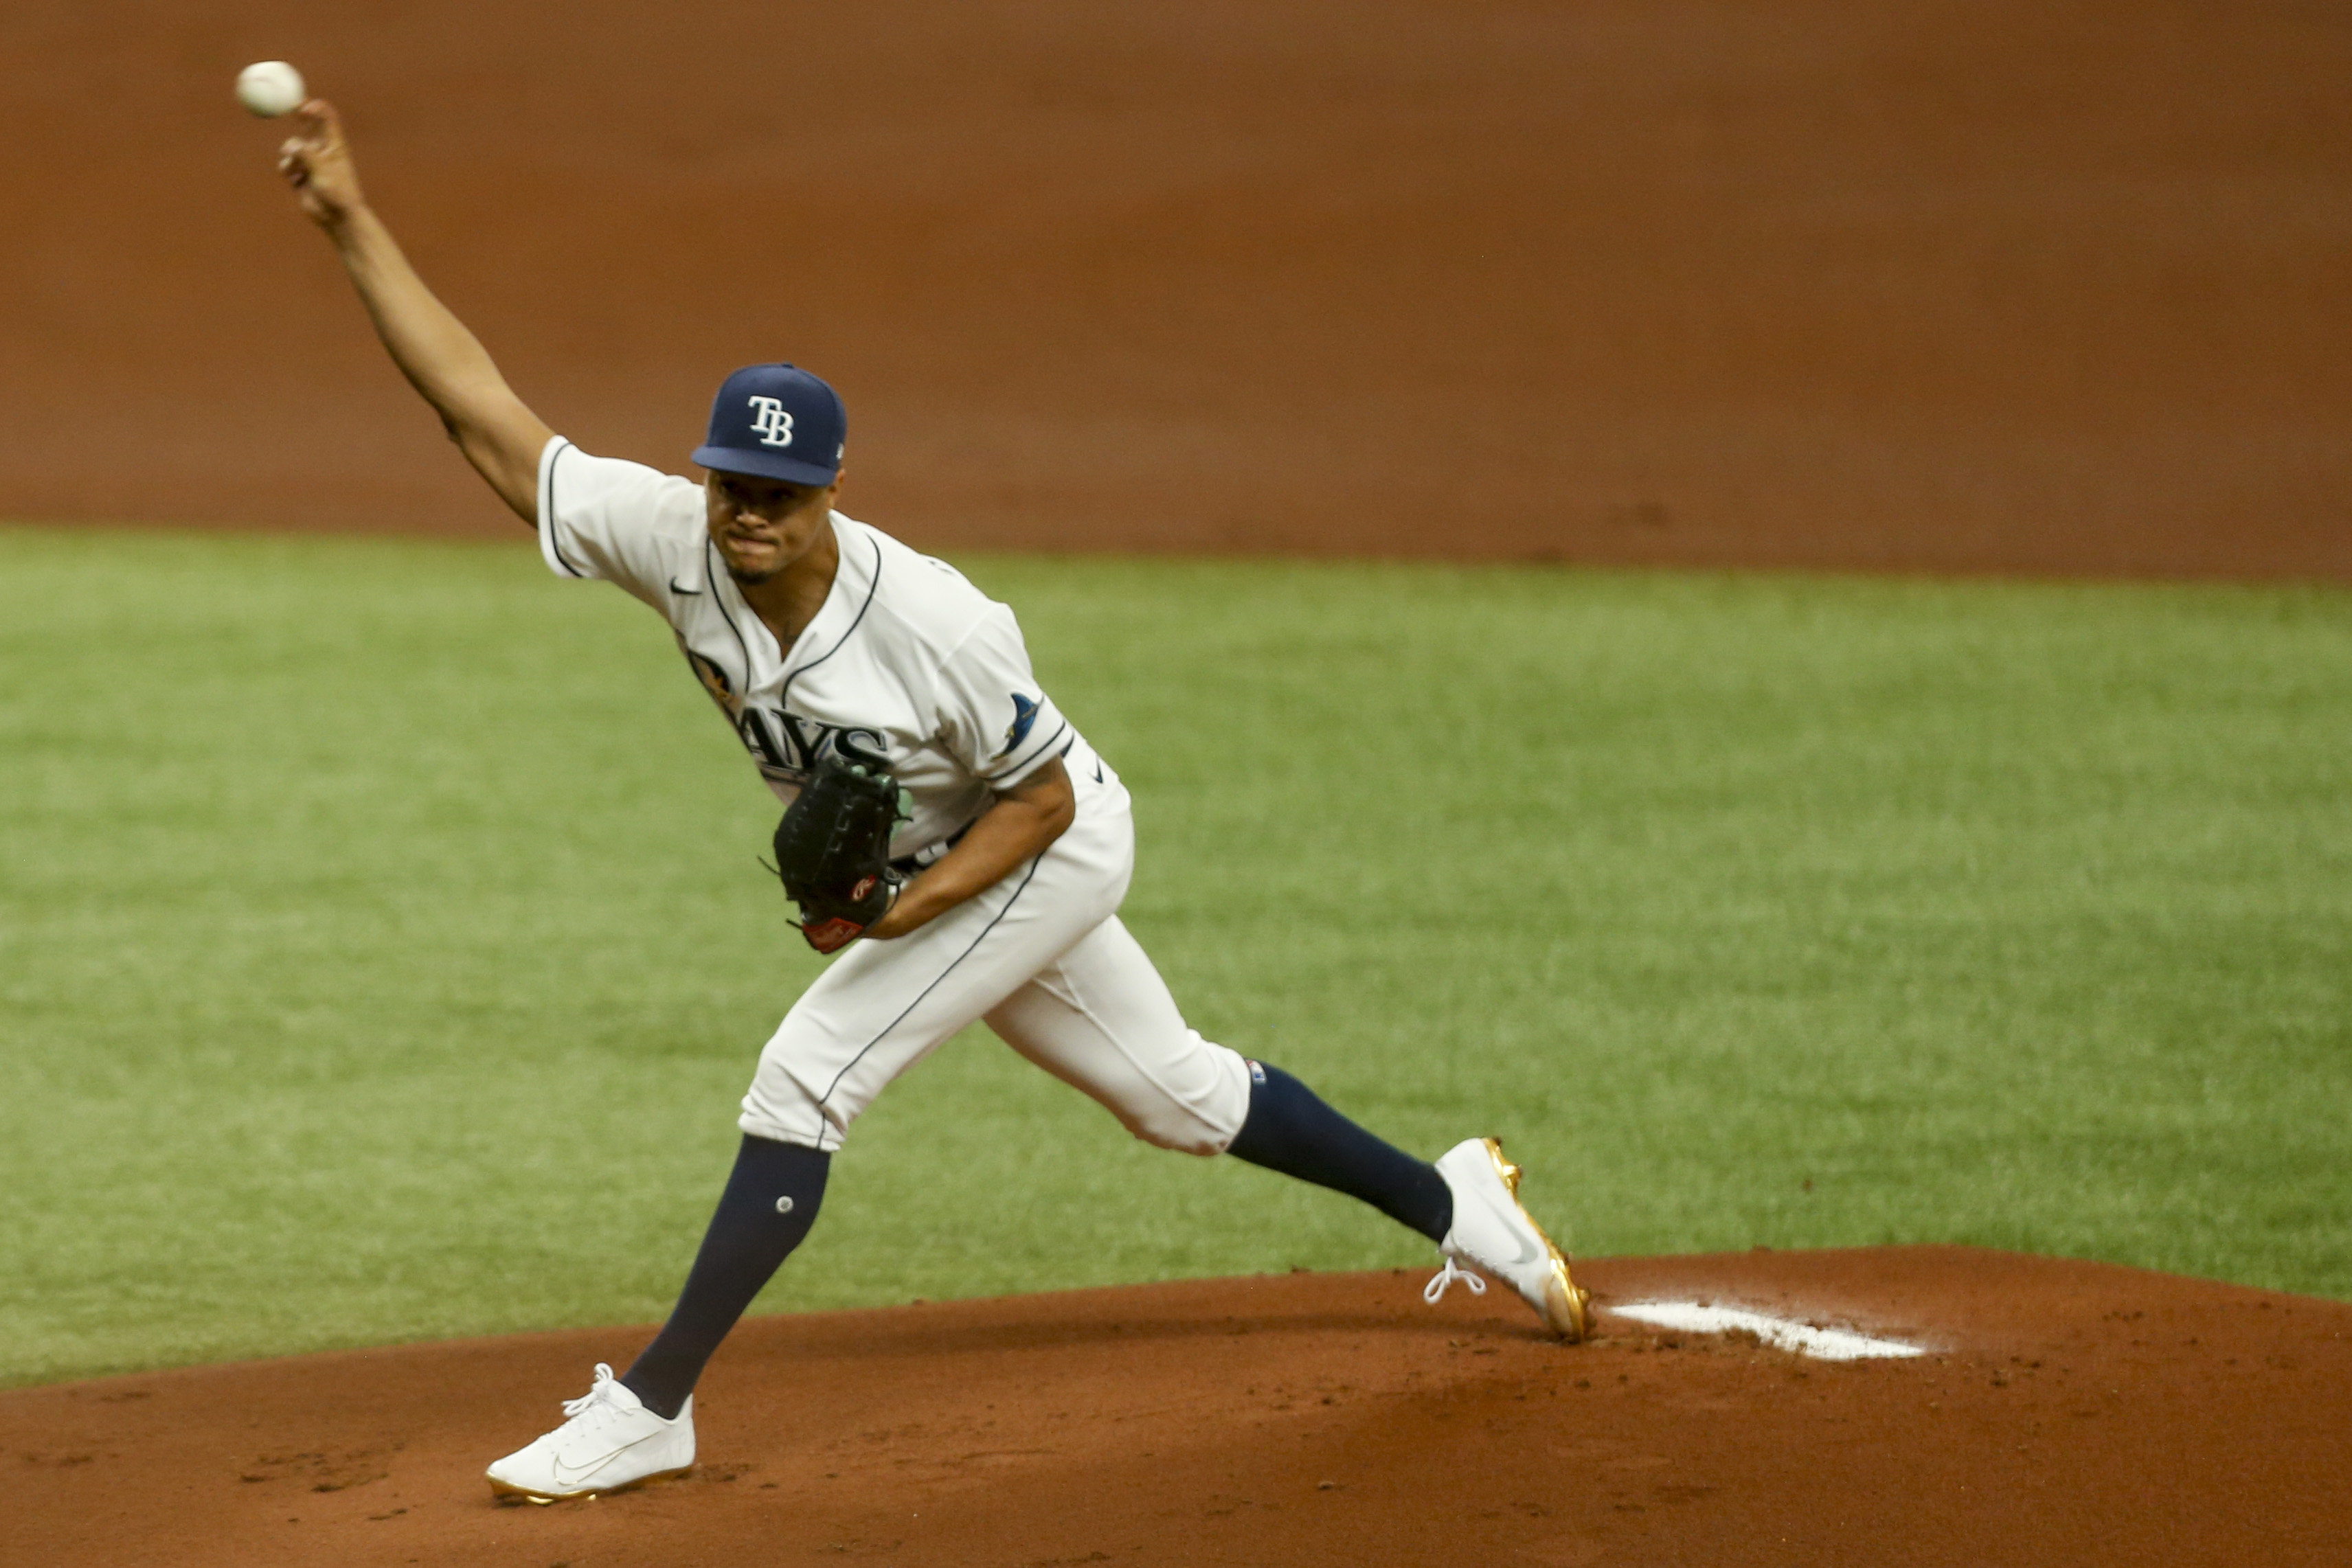 Chris Archer dealing with death of mother, to rejoin Rays soon